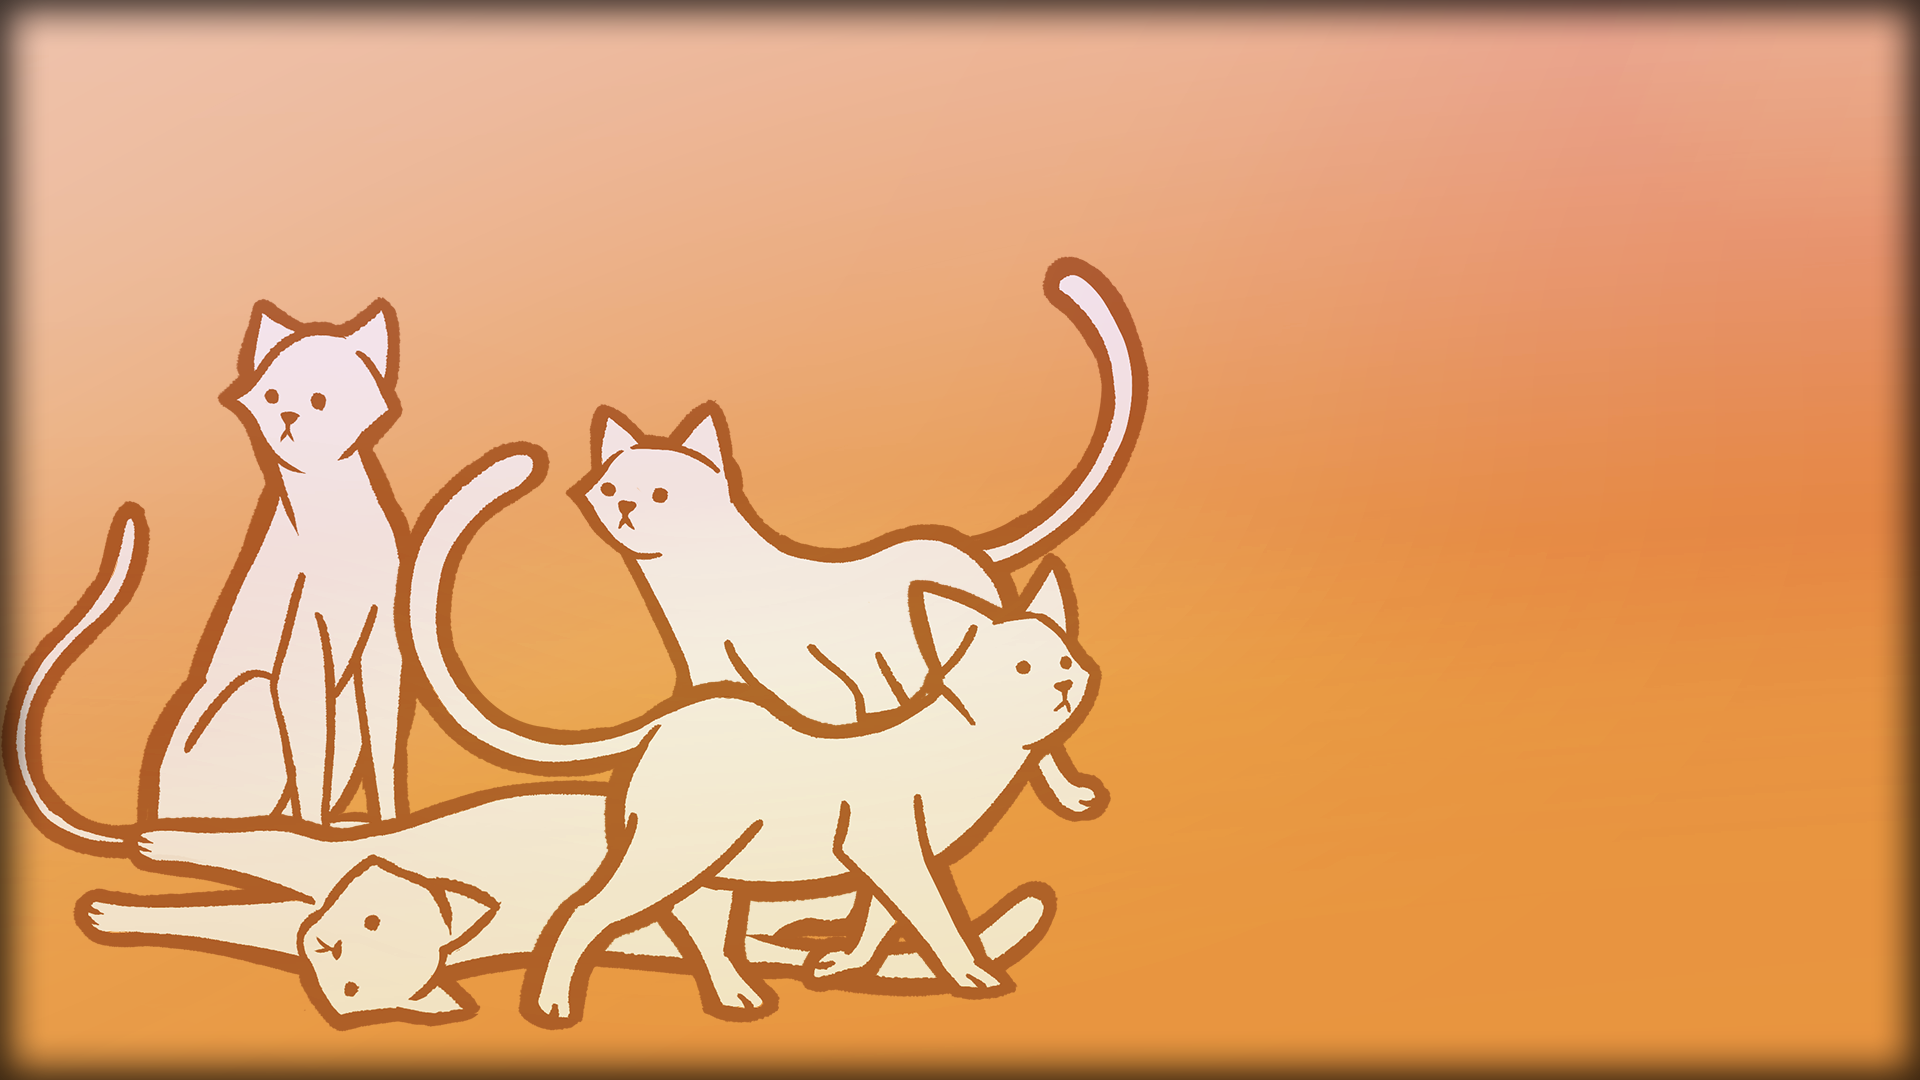 Icon for Found 160 cats